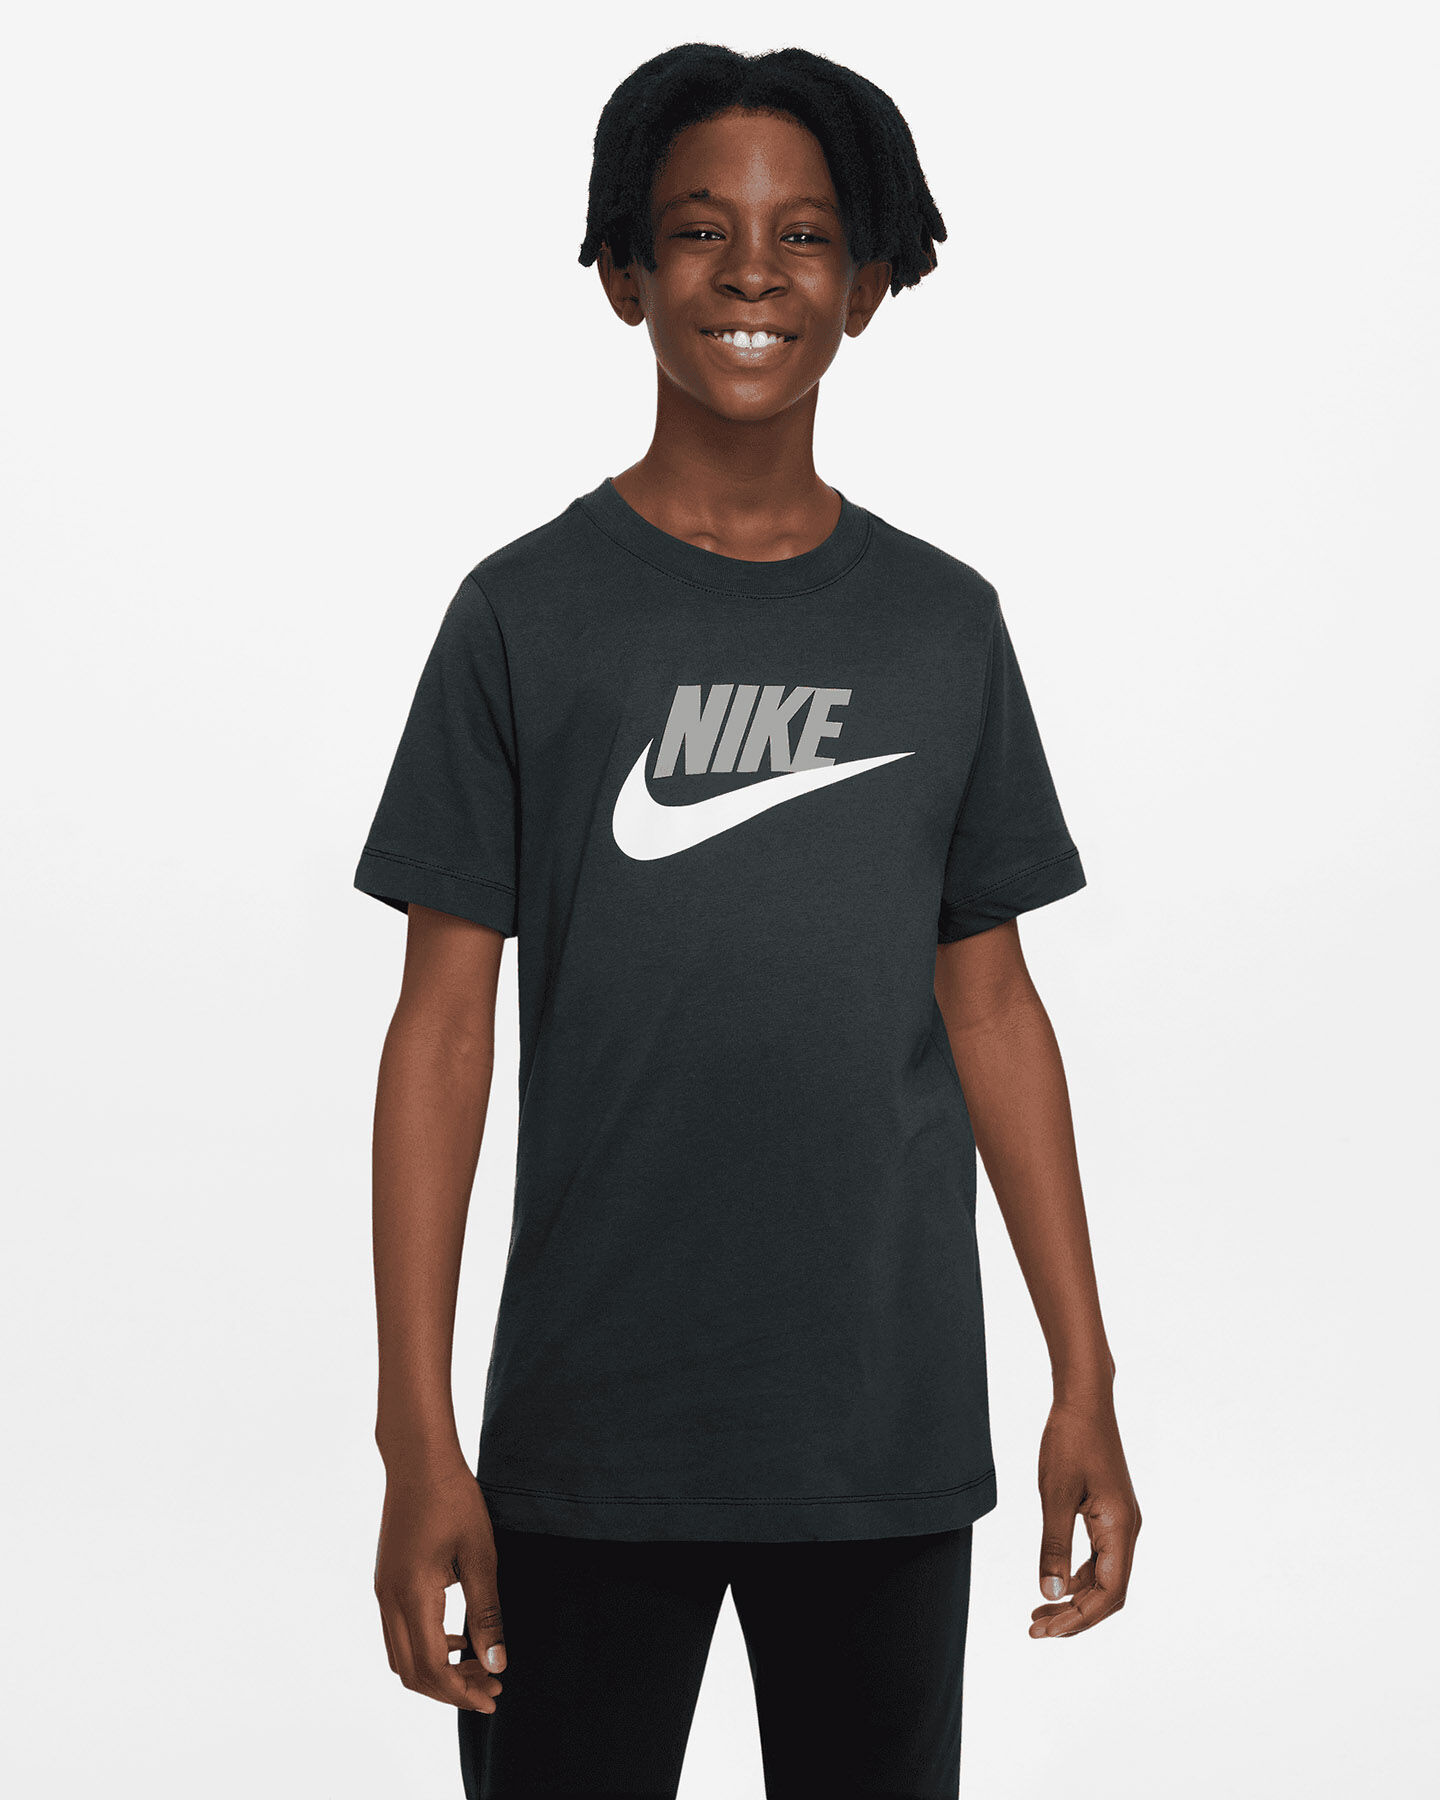  T-Shirt NIKE CLOS ANGELESSSIC JR S5162700|013|S scatto 3